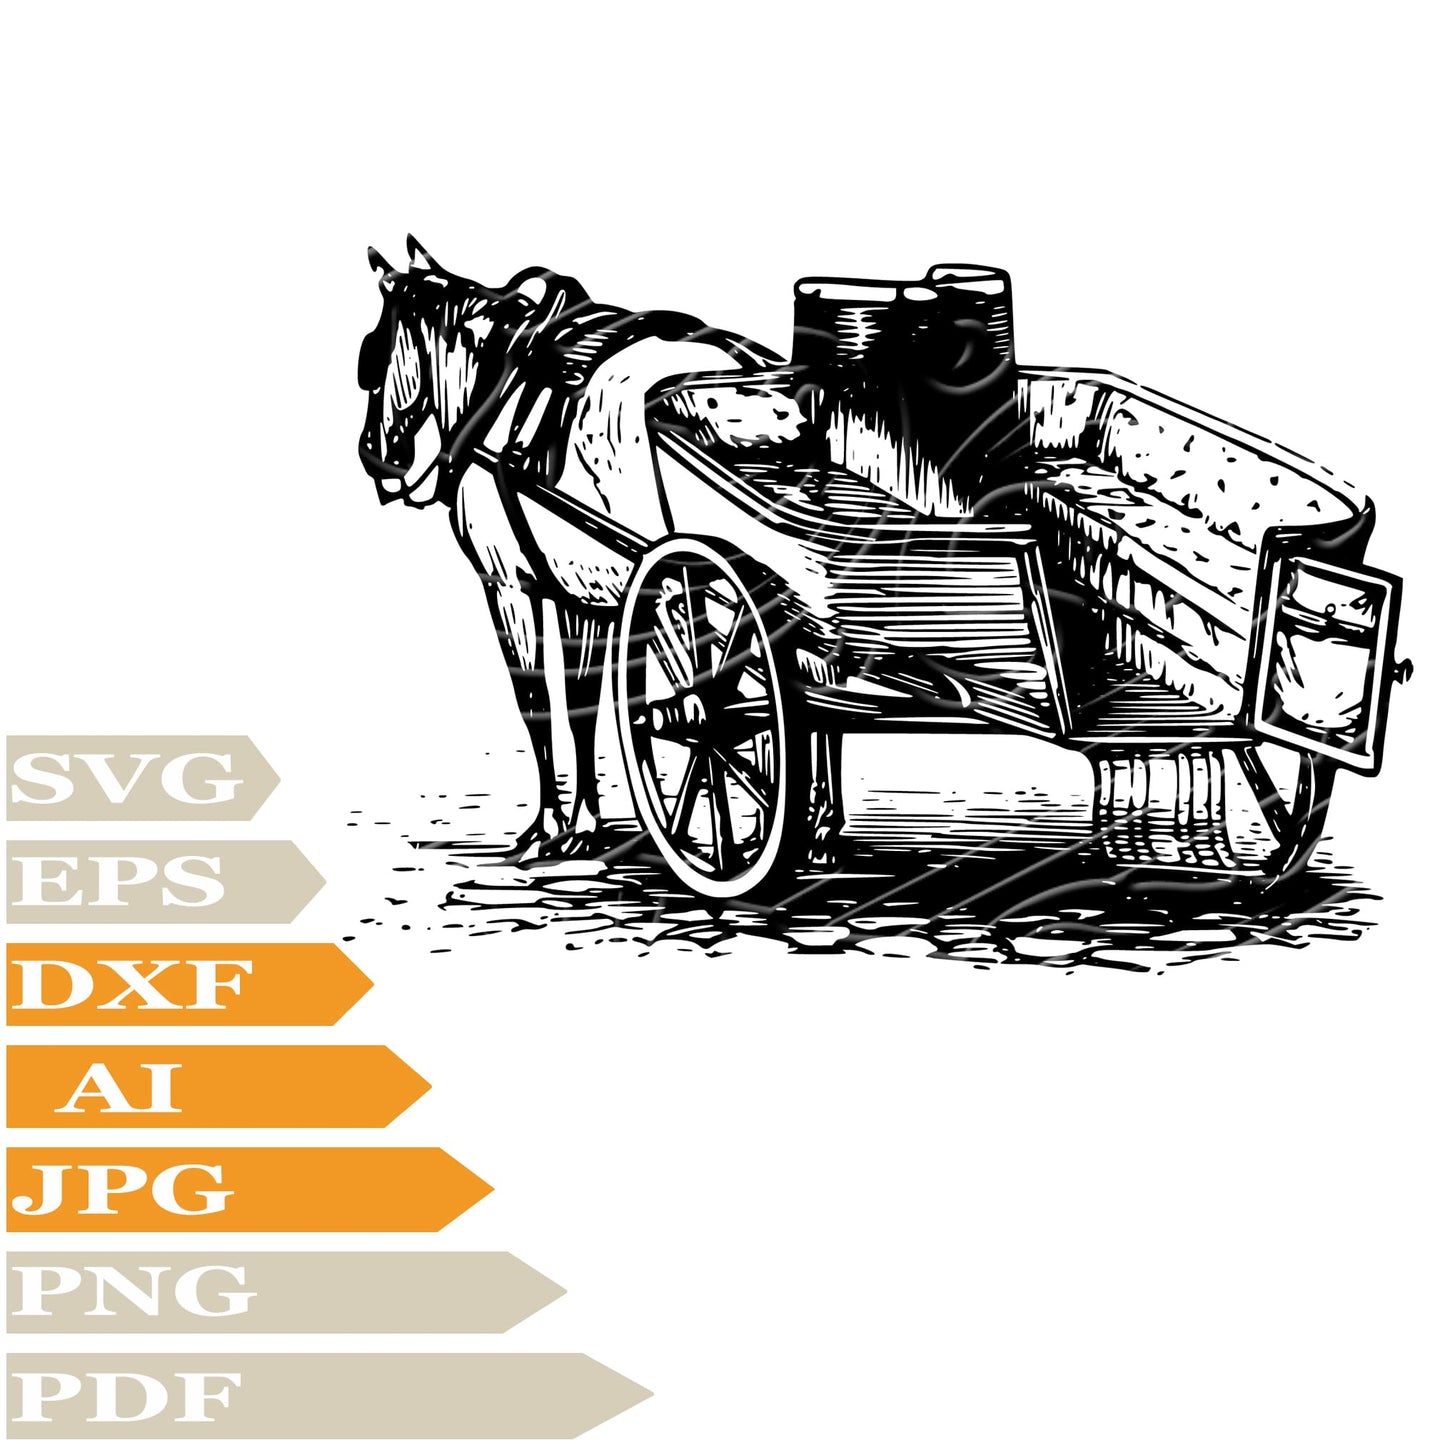 Horse, Horse Drawn Svg File, Image Cut, Png, For Tattoo, Silhouette, Digital Vector Download, Cut File, Clipart, For Cricut